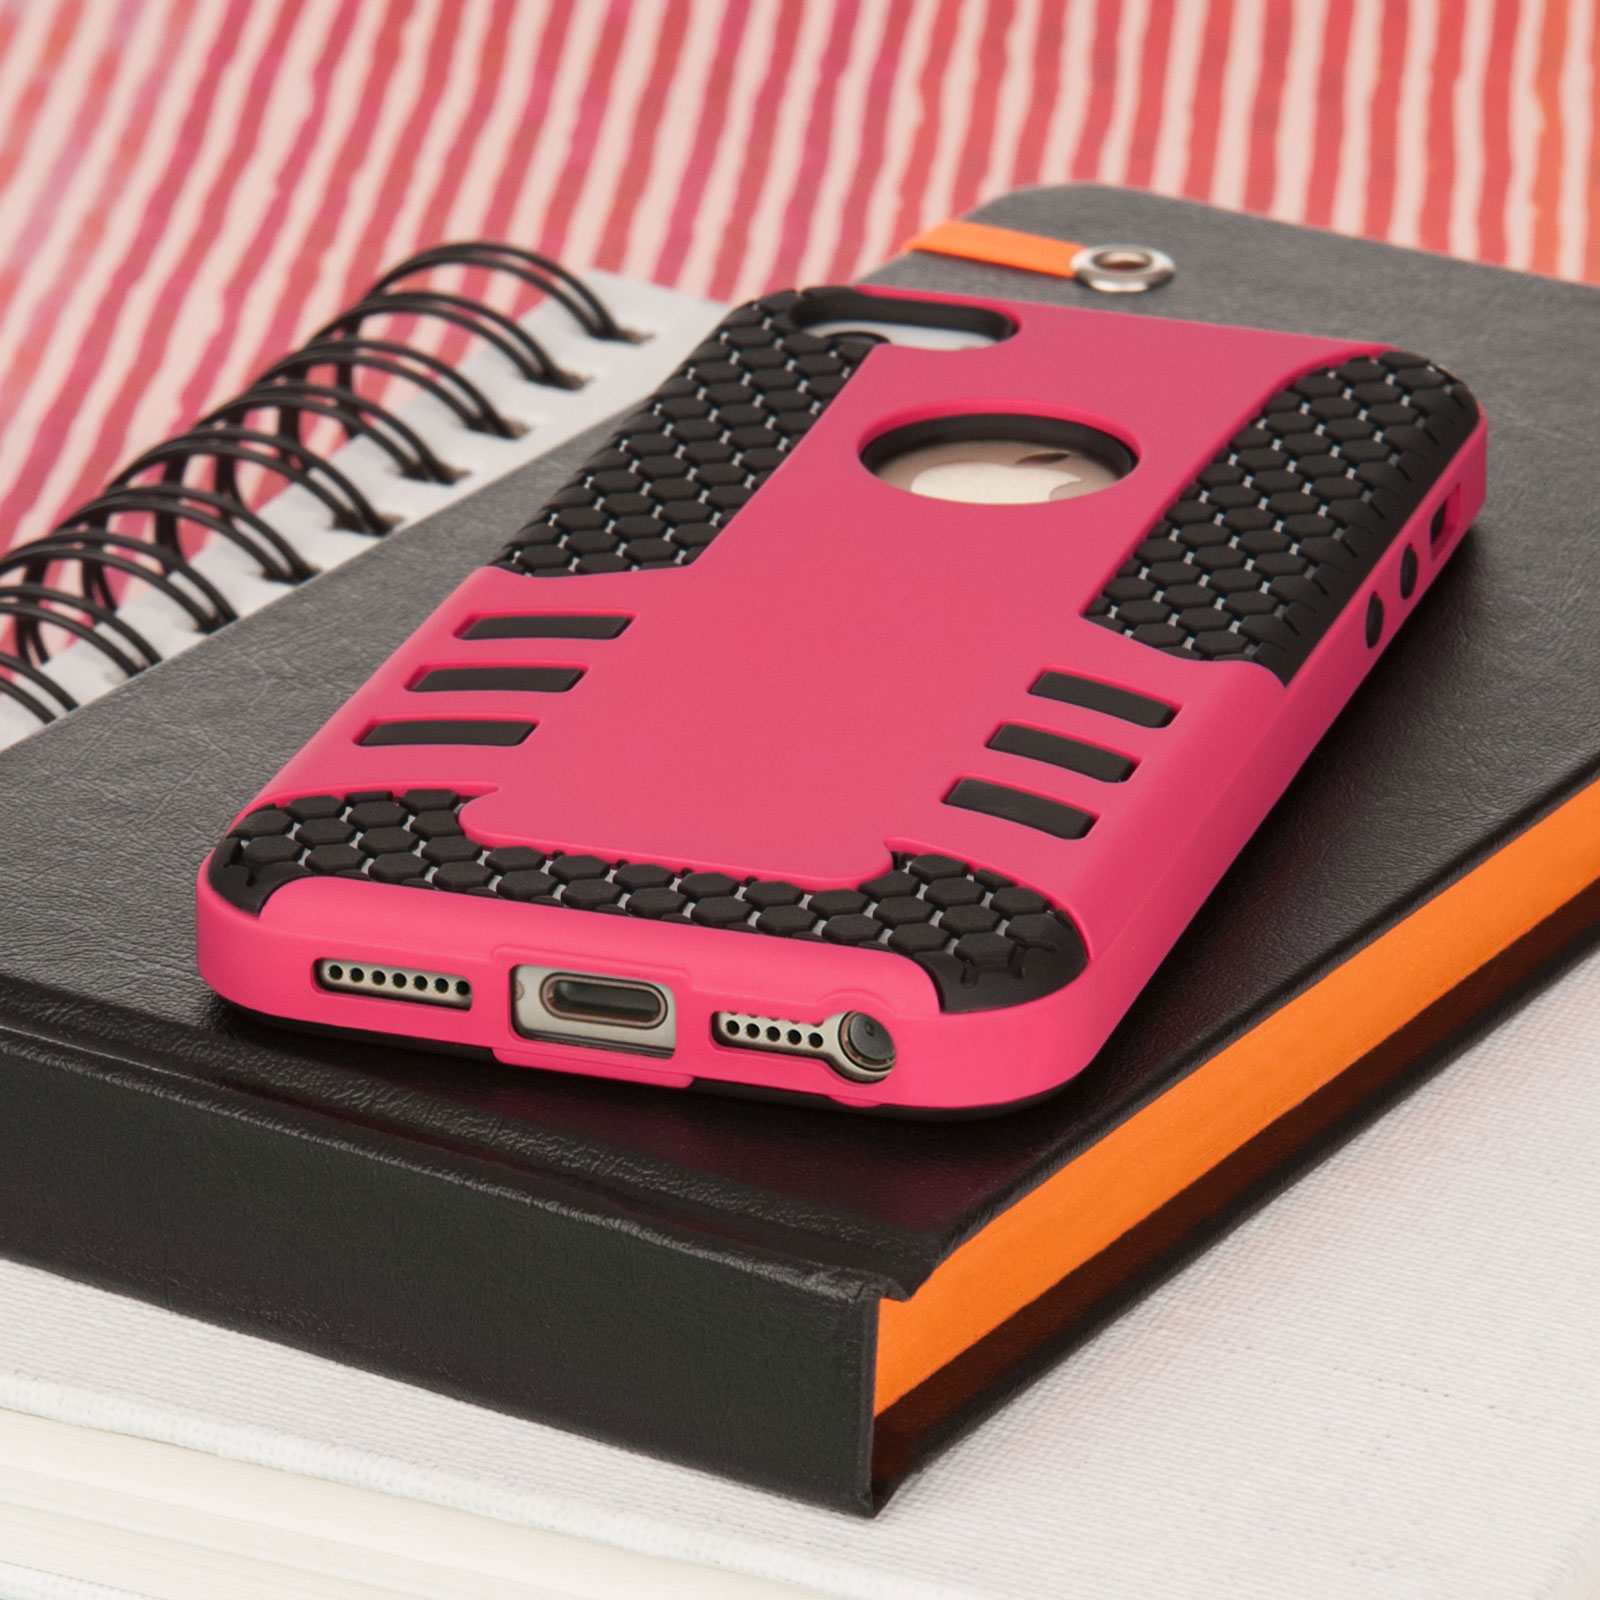 YouSave iPhone 5 / 5S / SE Border Combo Case - Hot Pink